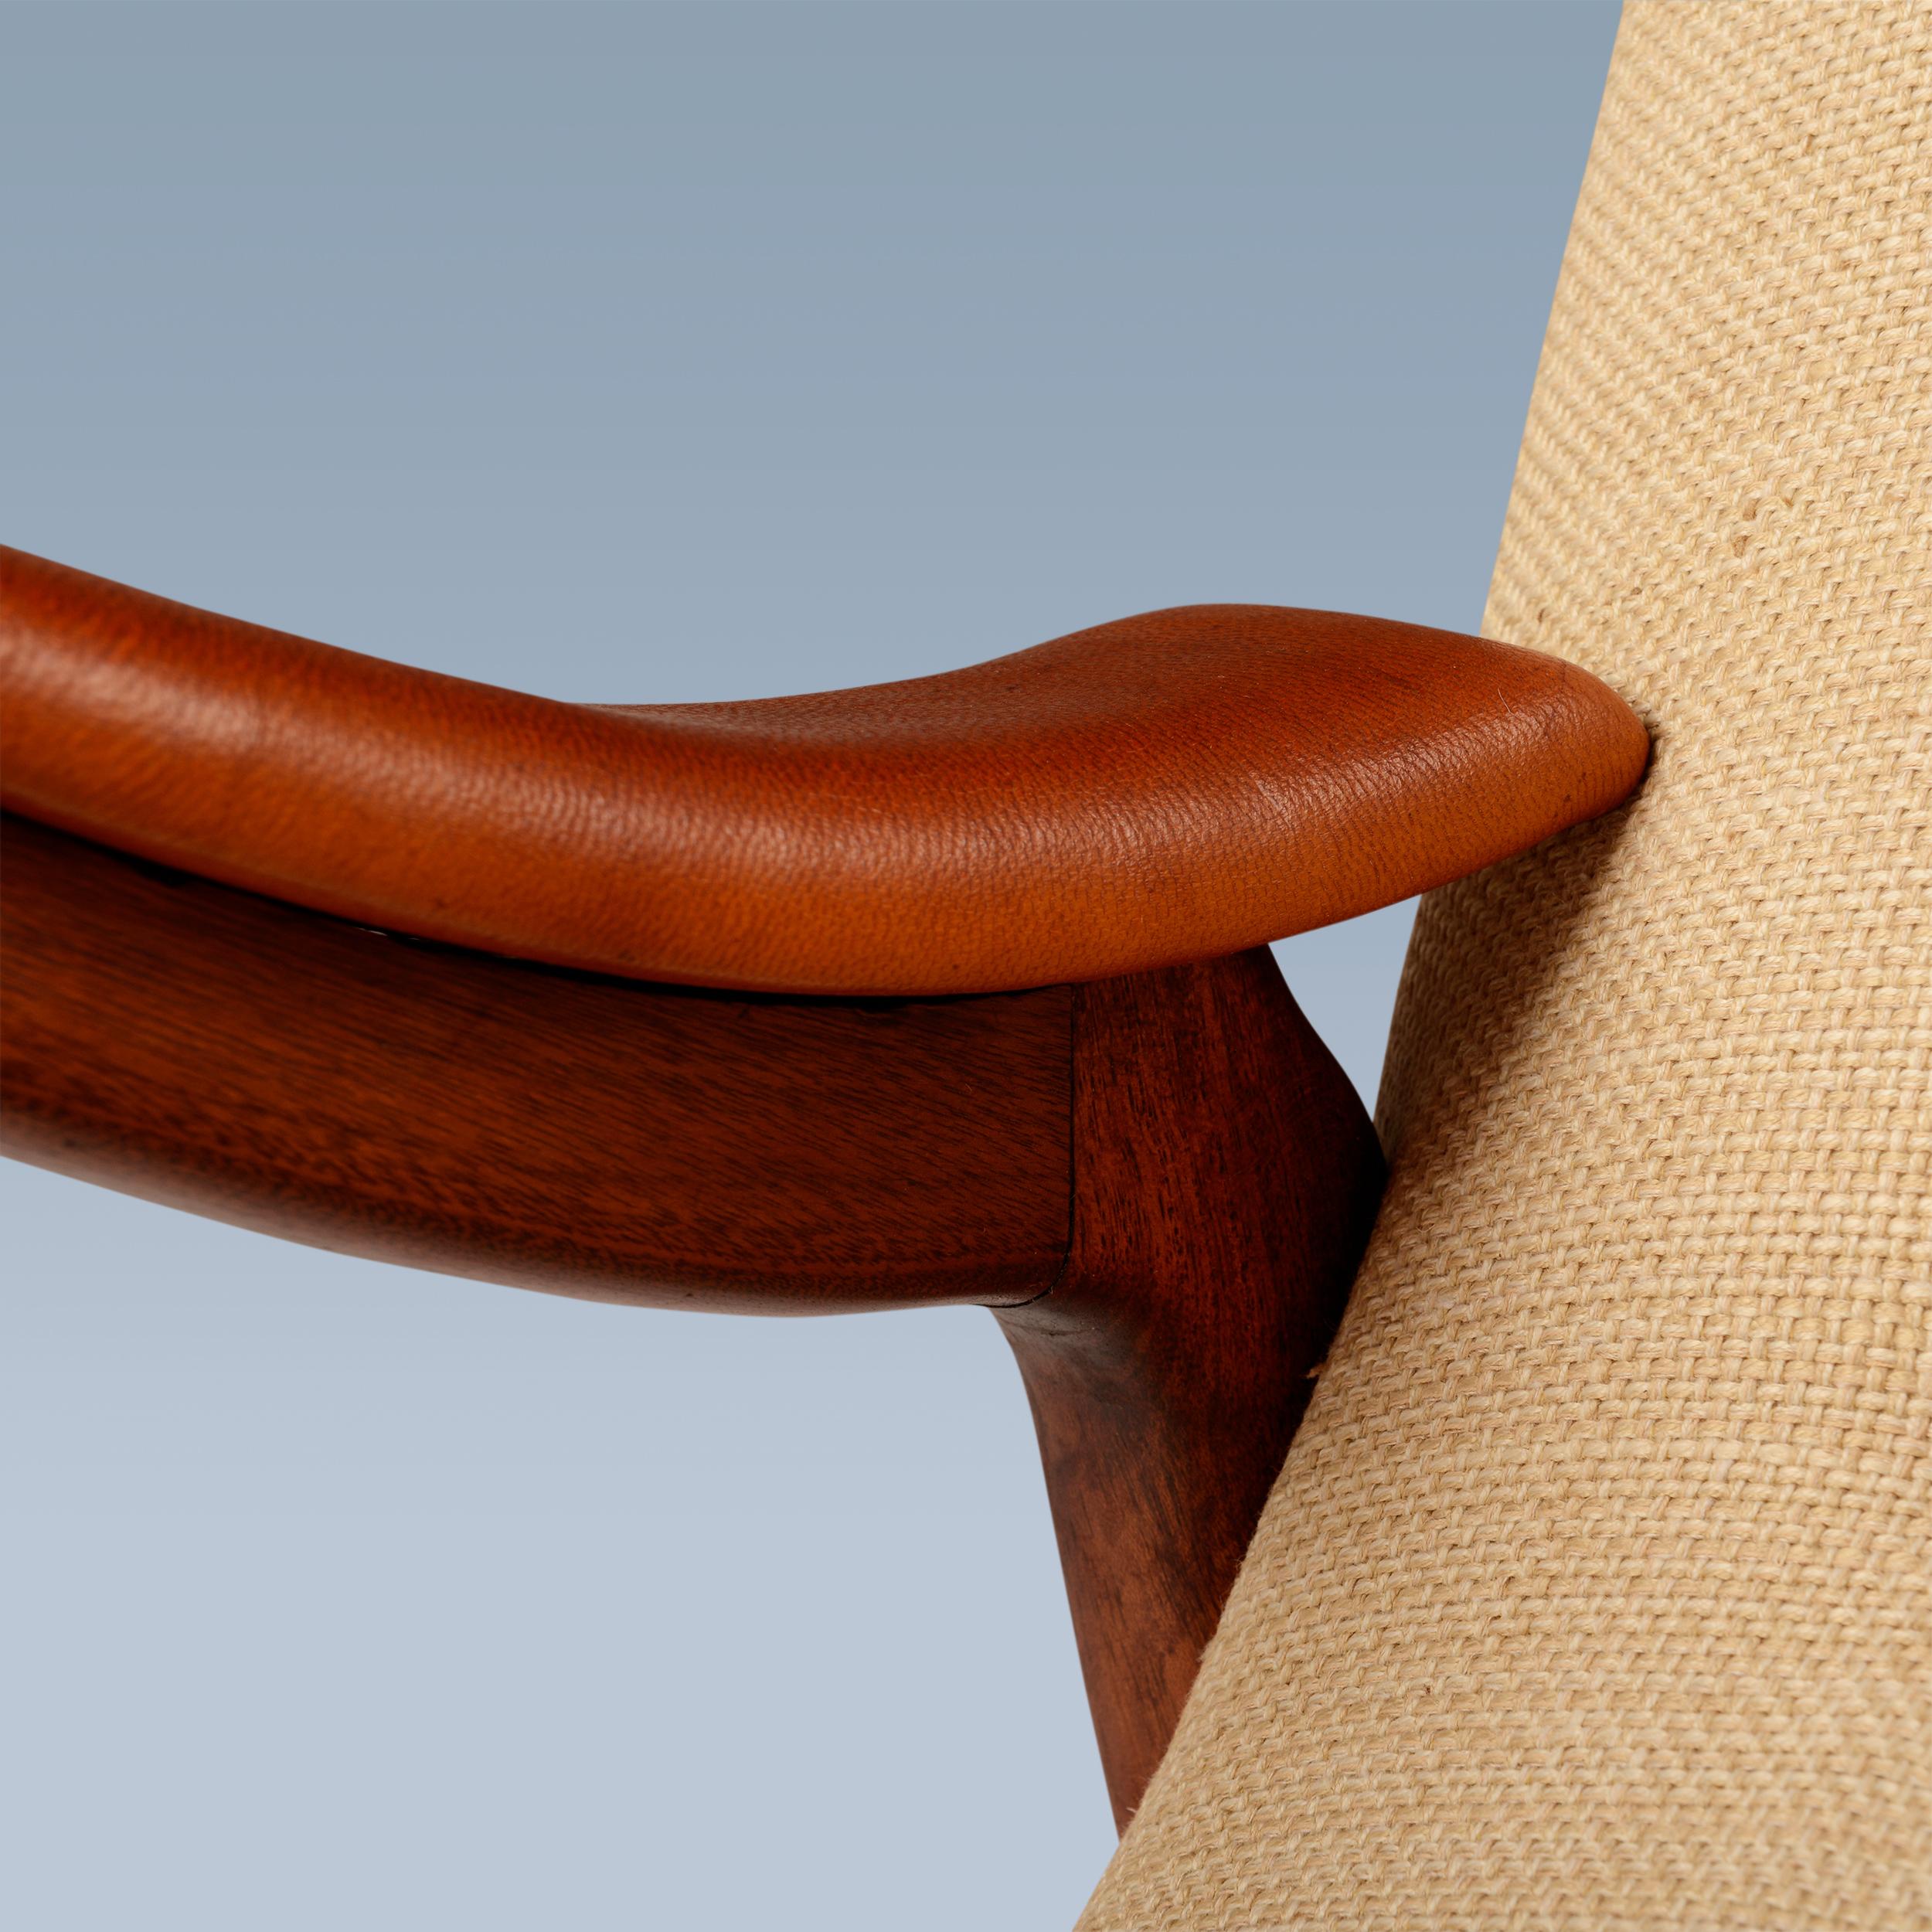 Teak chair with curvy seat upholstered with light fabric and leather details For Sale 2